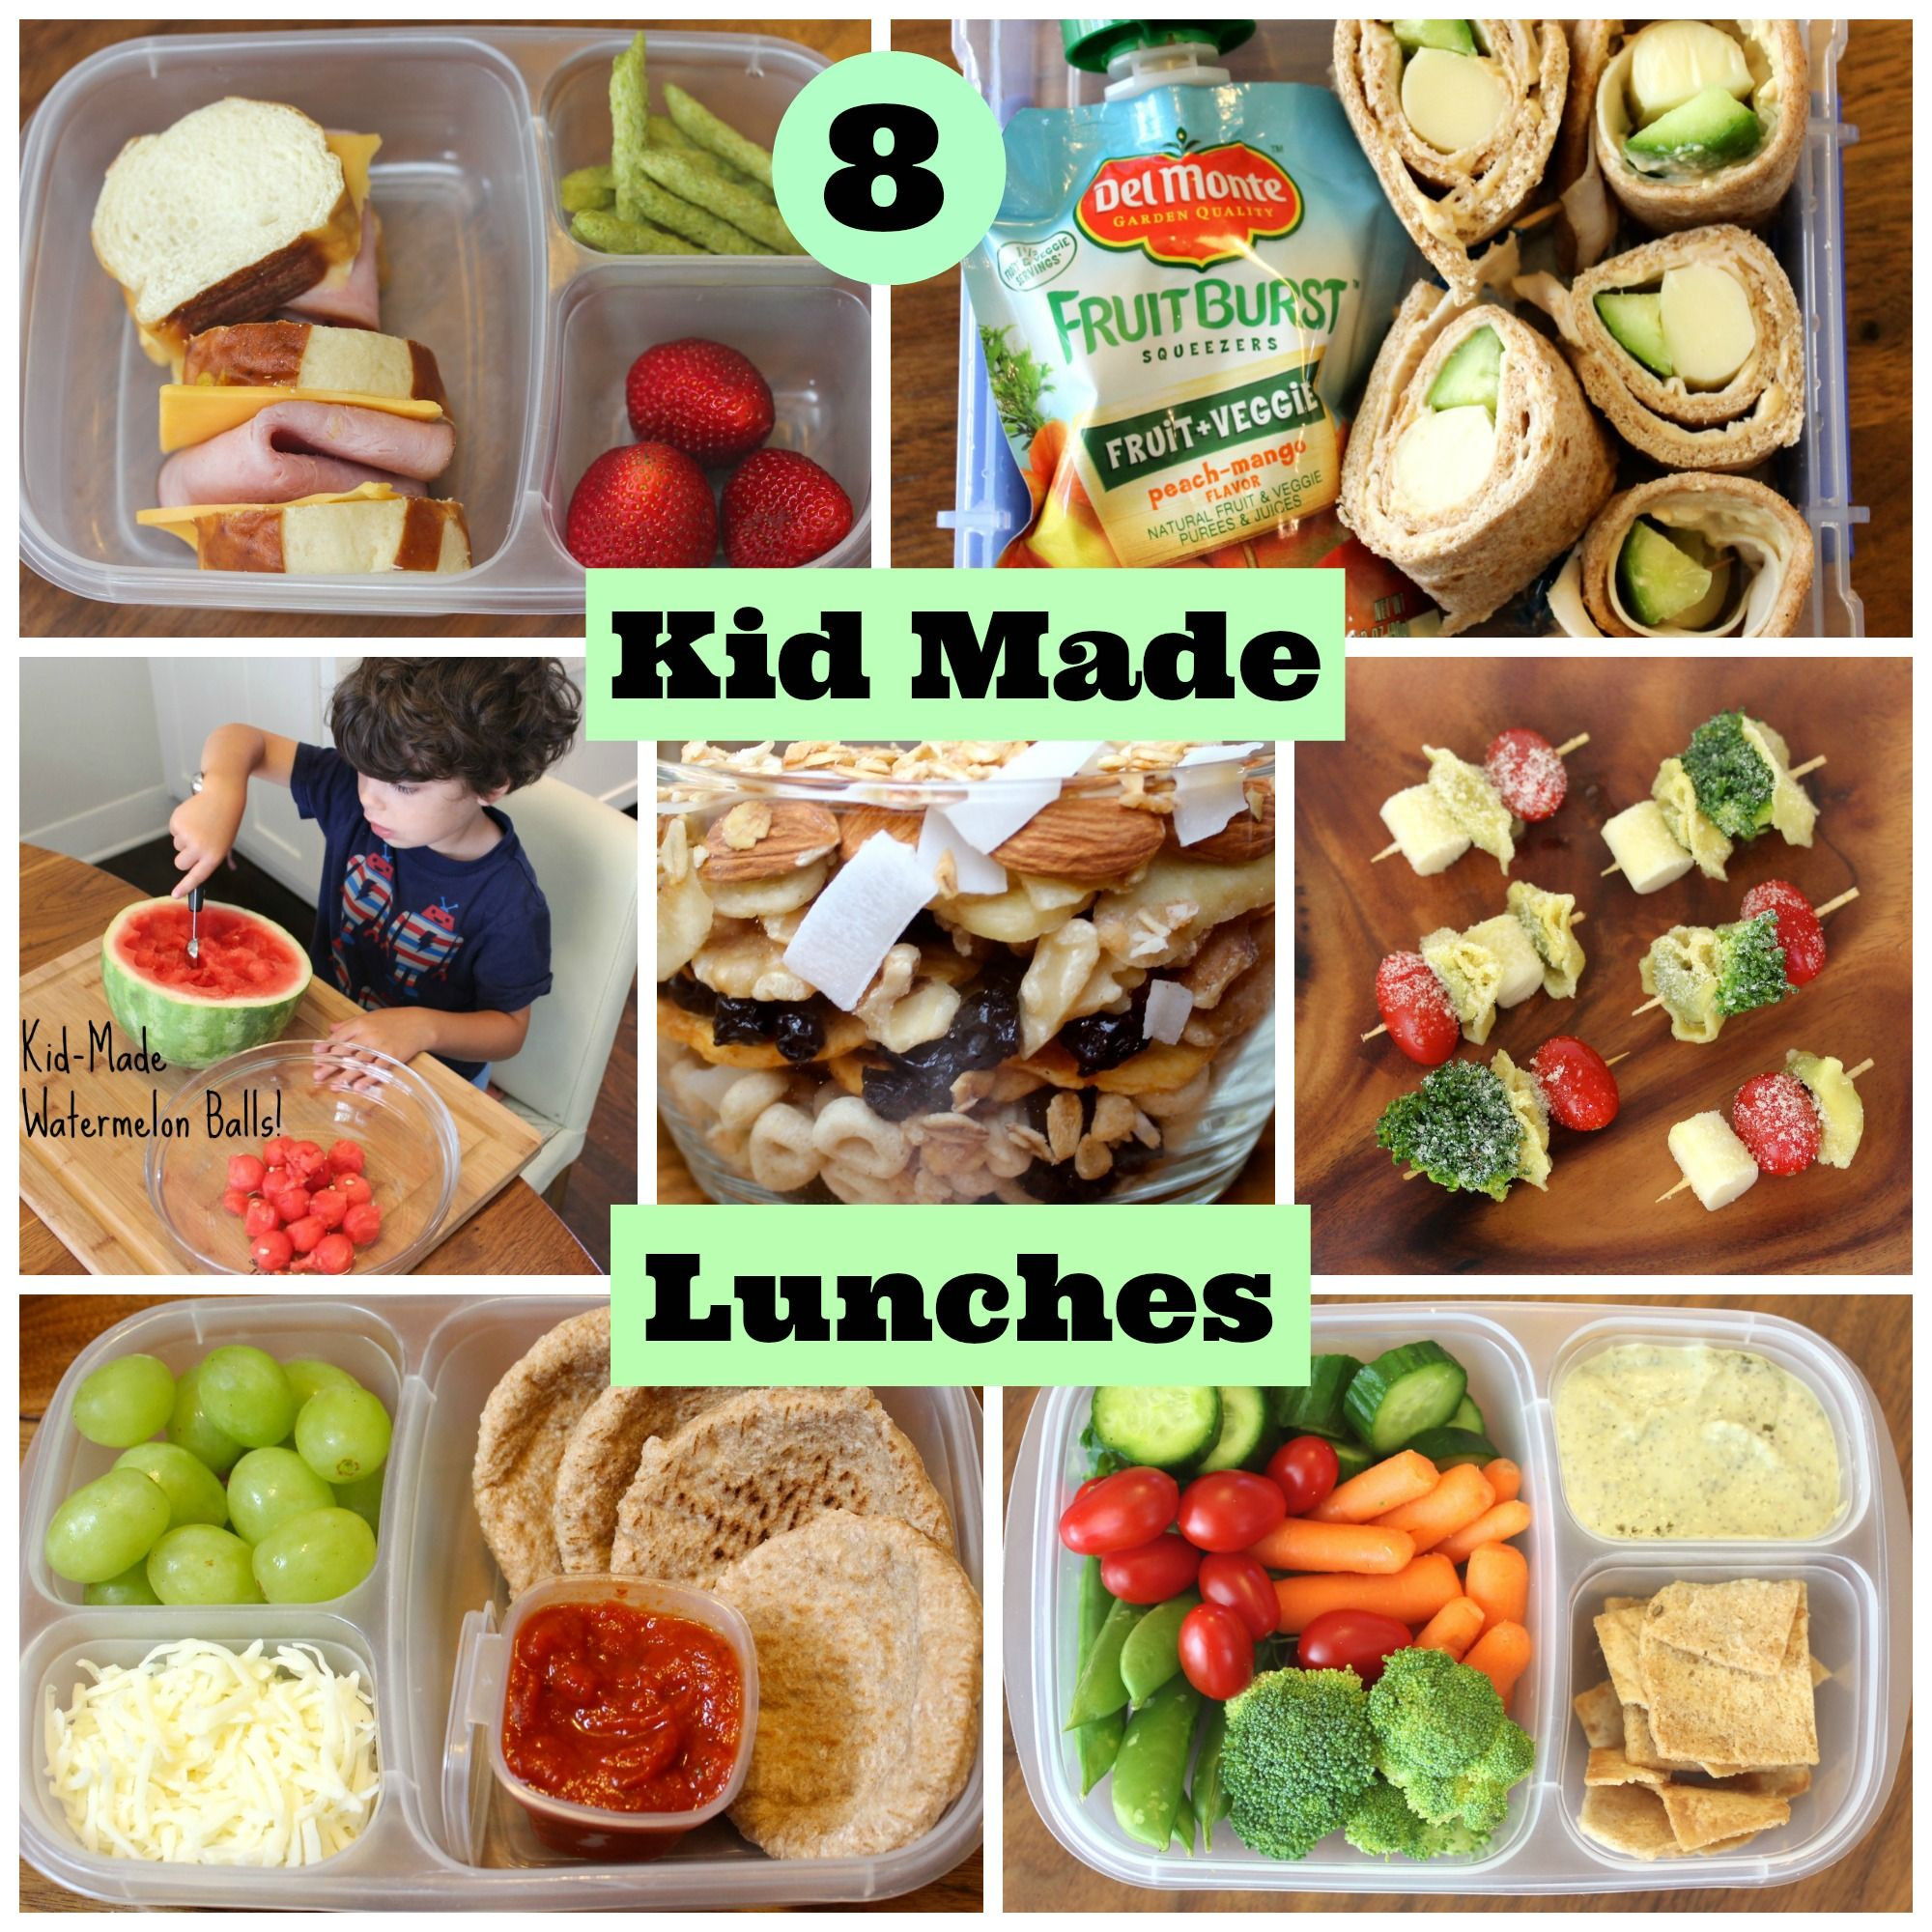 Healthy Foods For Kids School Lunches
 4 Healthy School Lunches Your Kids Can Make Themselves